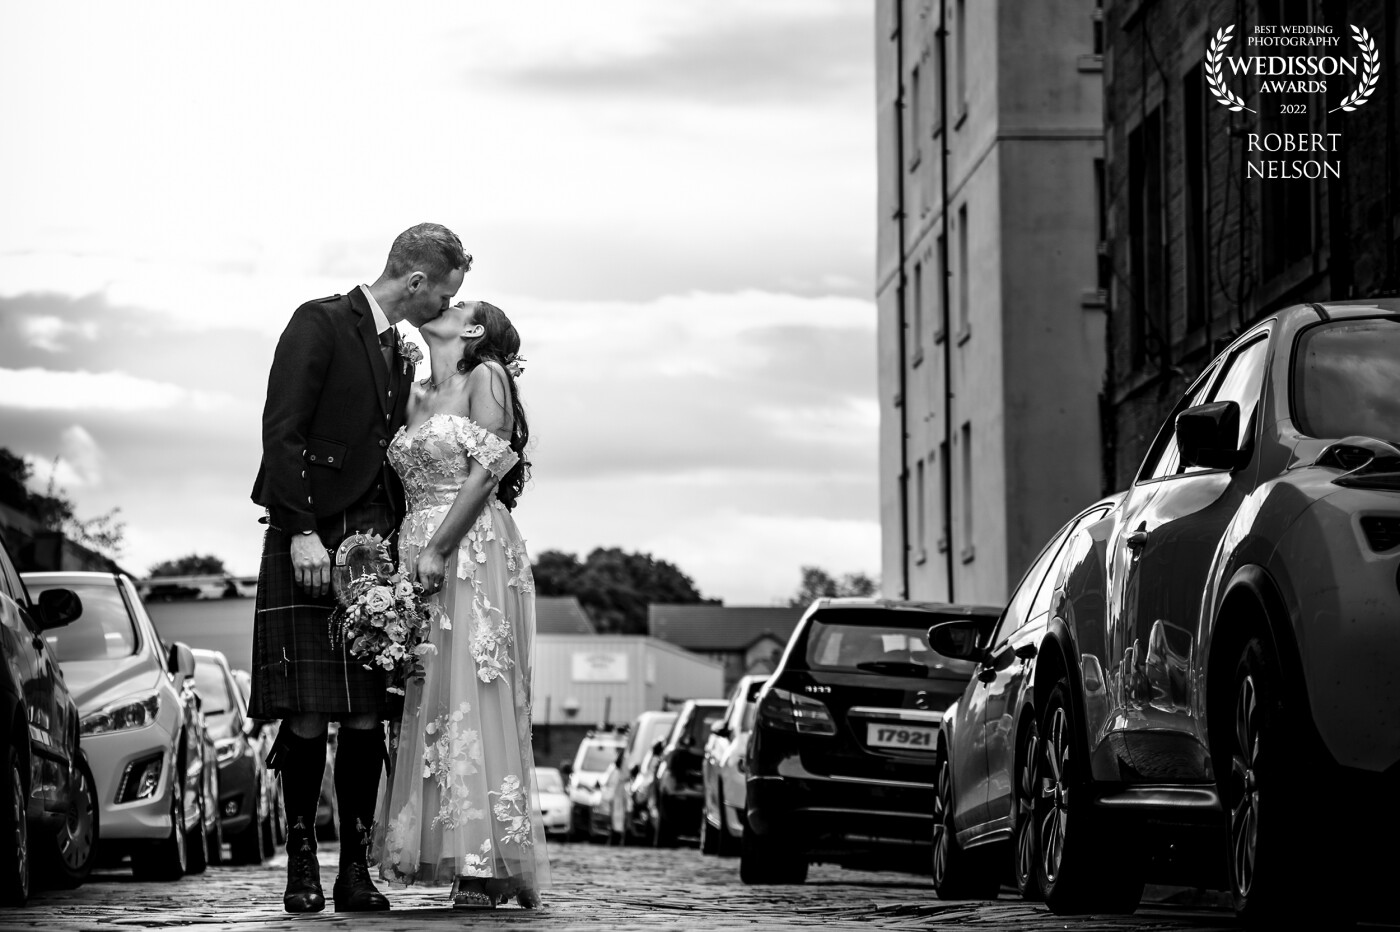 It's not too often that I get to photograph outside of the confines of the actual wedding venue, but I couldn't resist the opportunity to get the couple out in the streets of Edinburgh, especially as it's not one of my local areas to photograph a wedding.